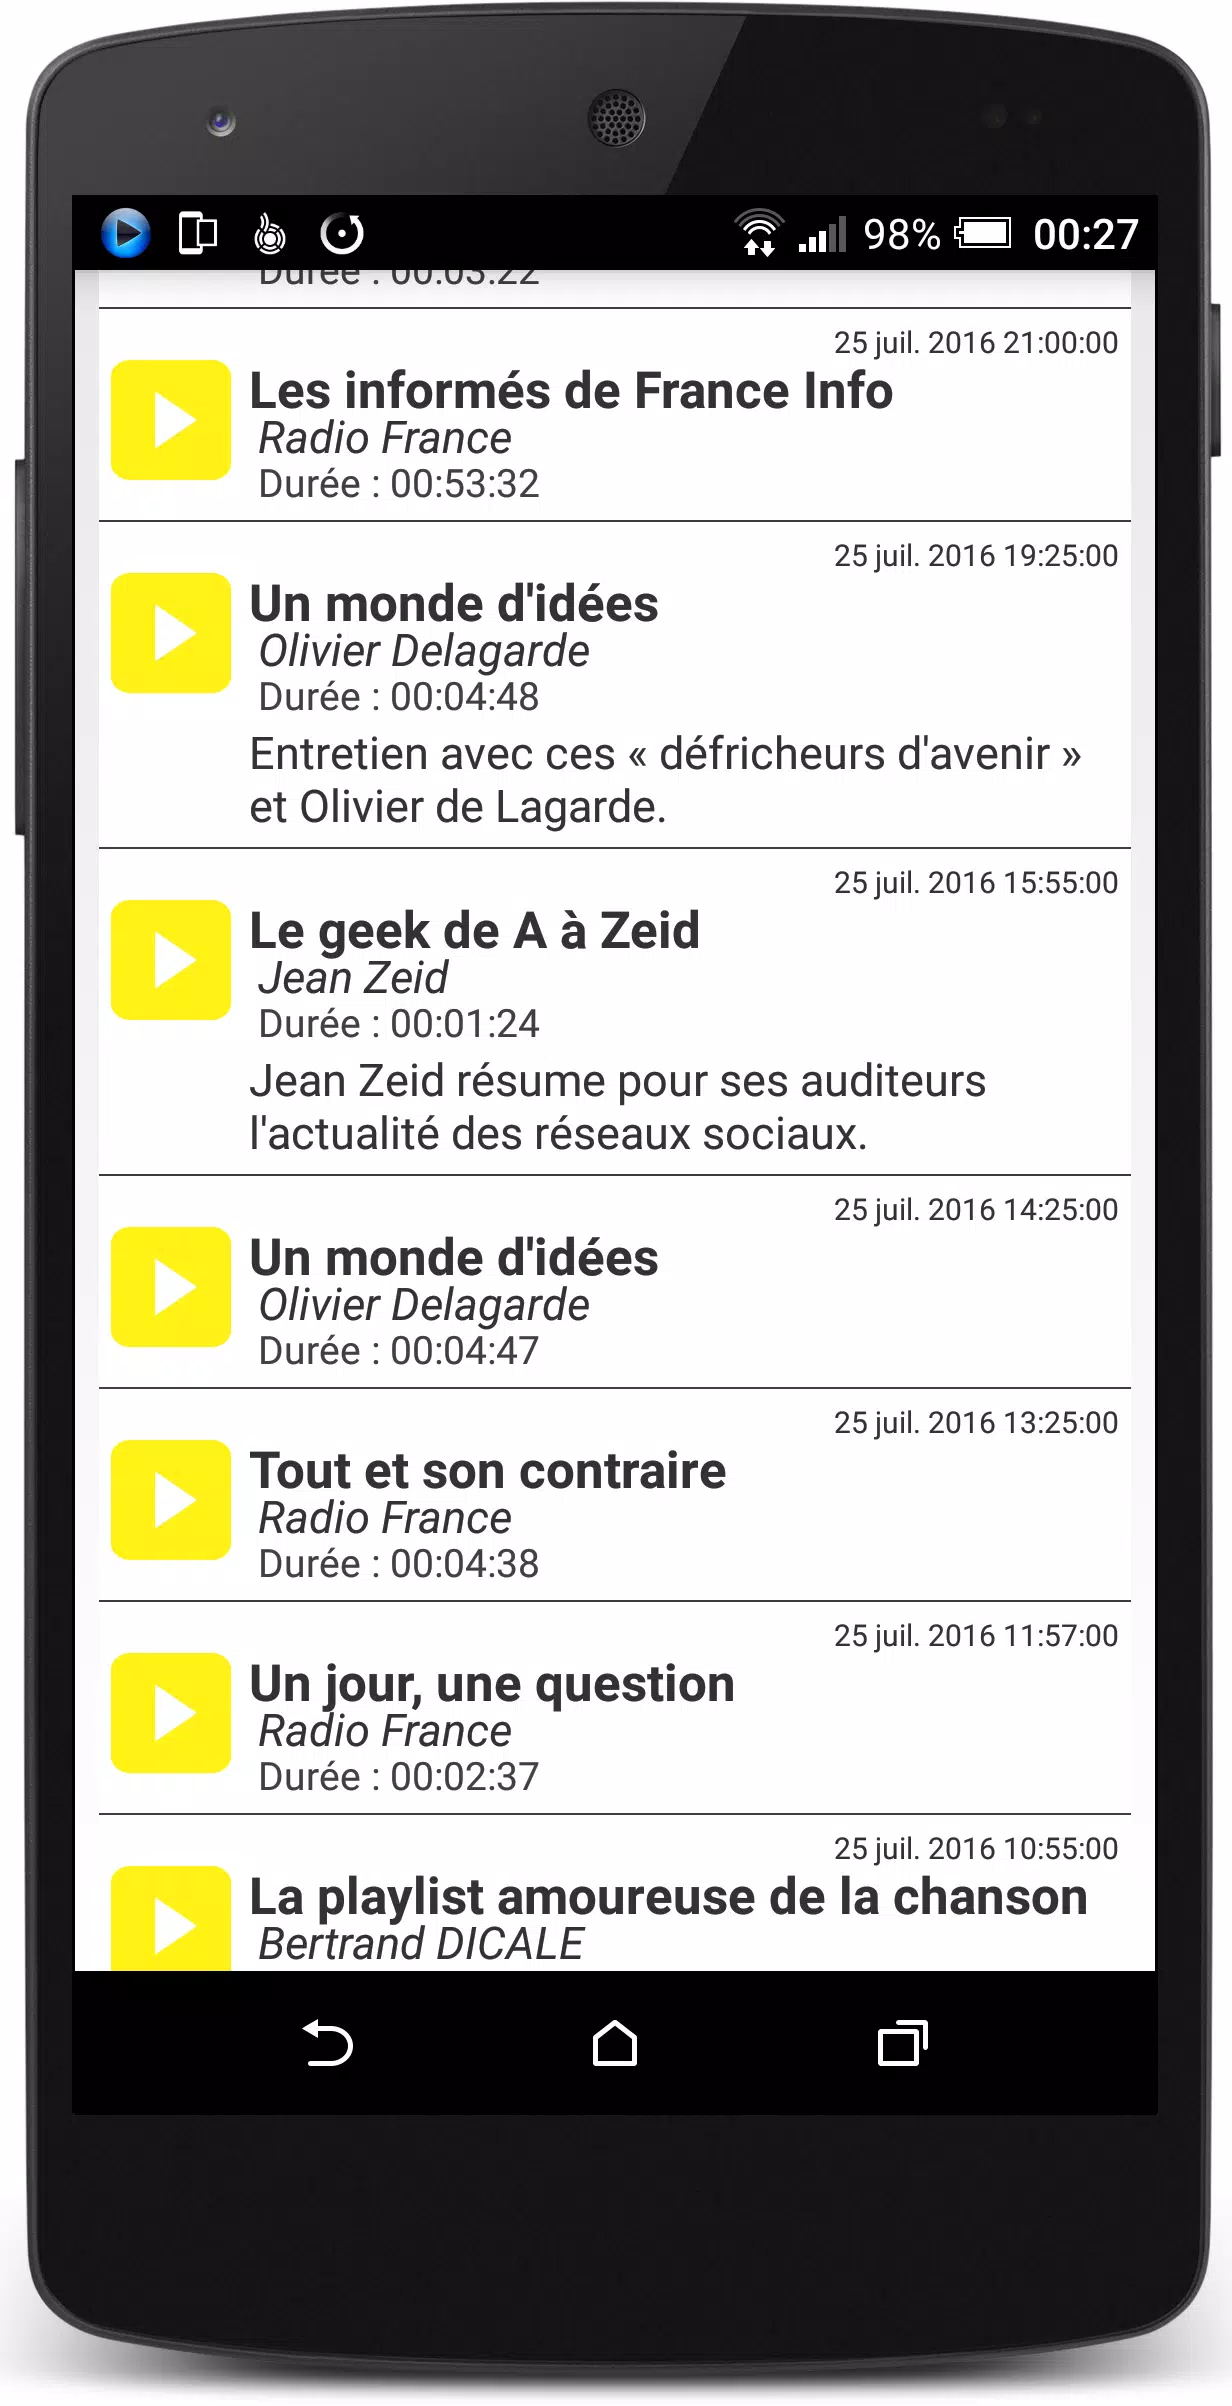 Radios Info France for Android - APK Download